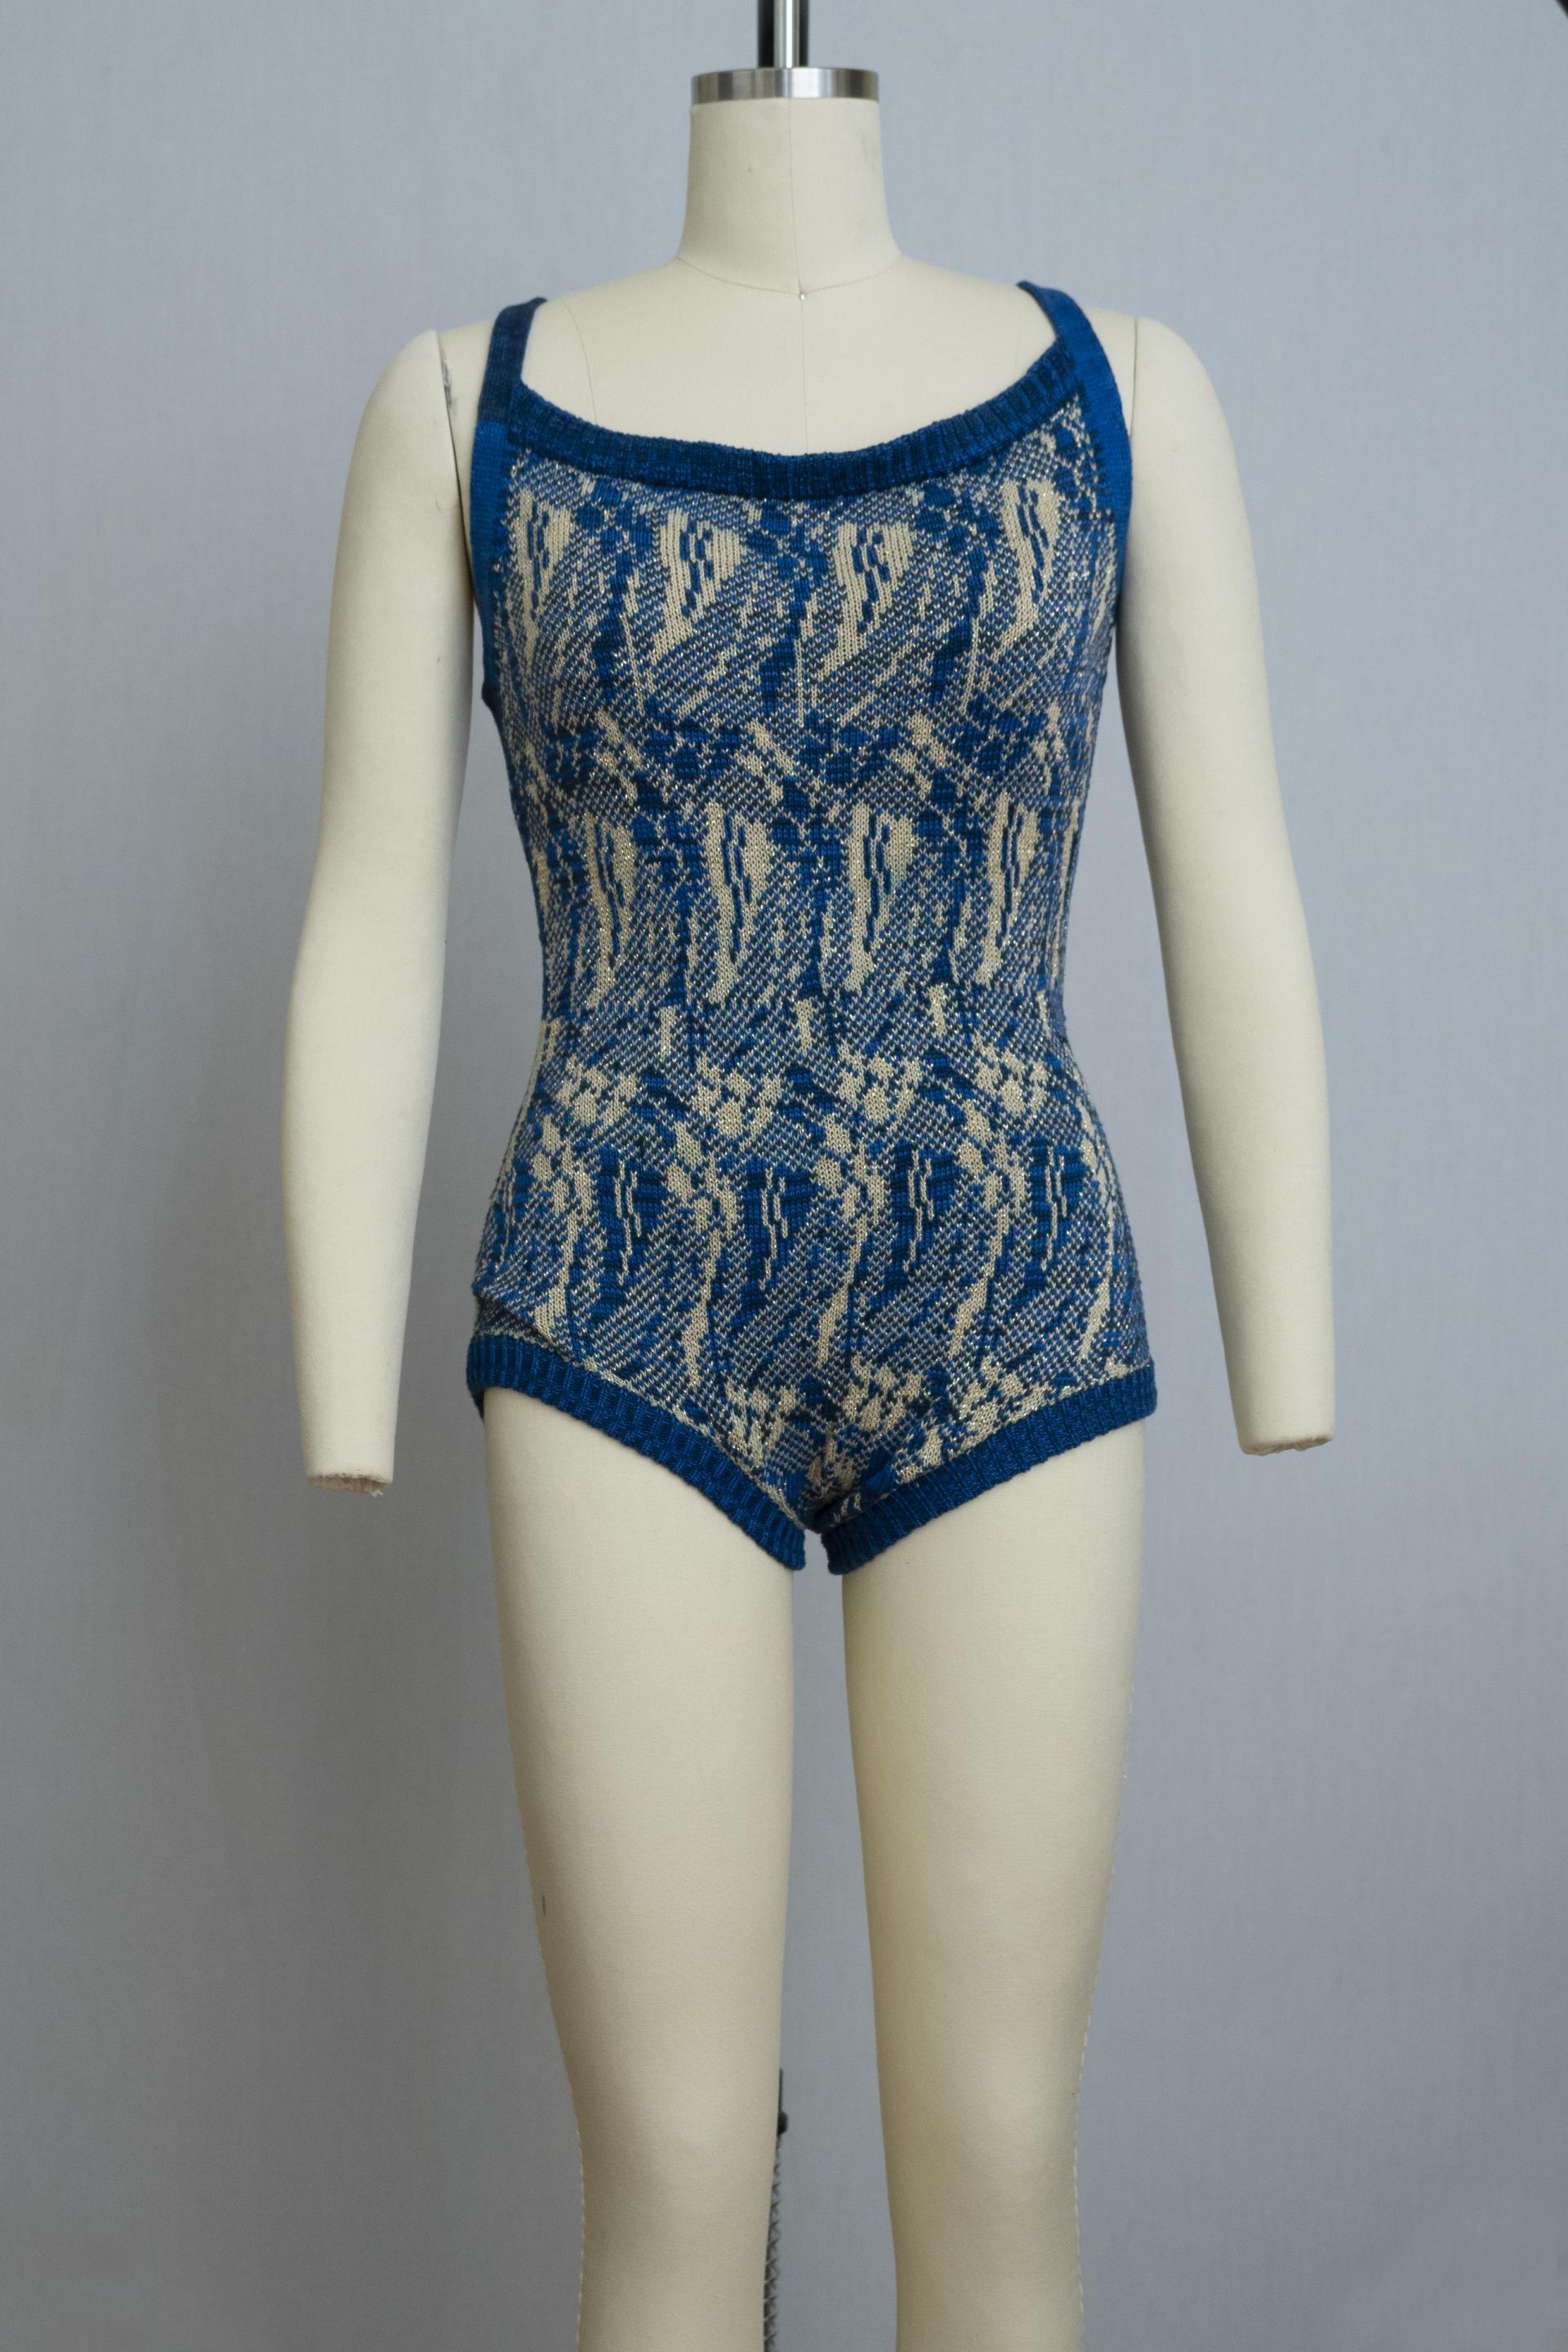 dress form wearing a knit playsuit in blues and yellows